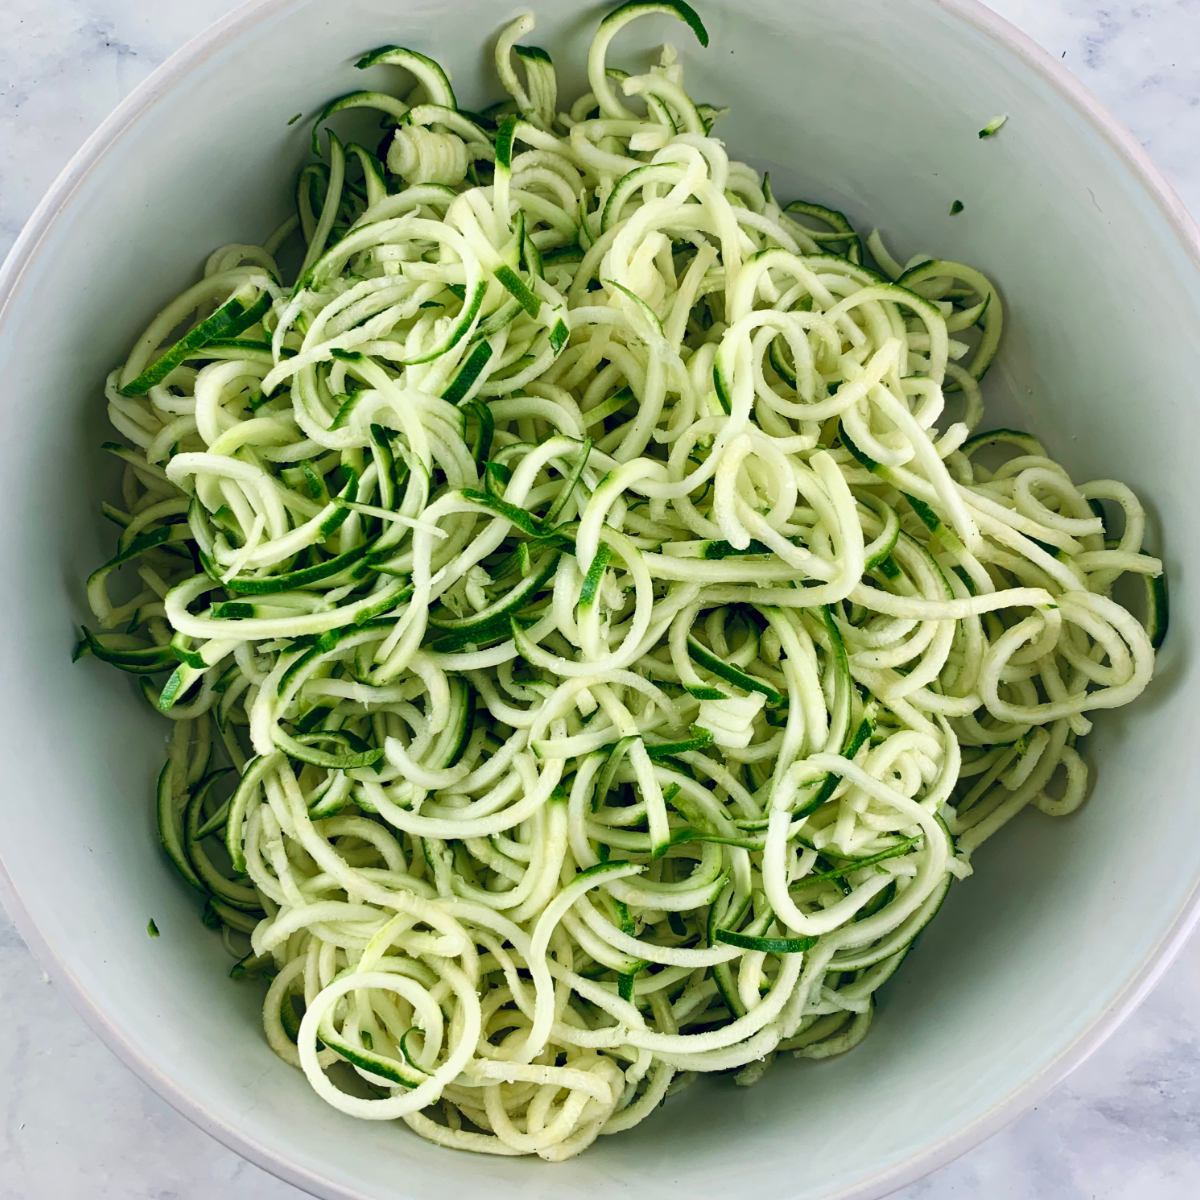 Zucchini Noodles "zoodles" in a white bowl.